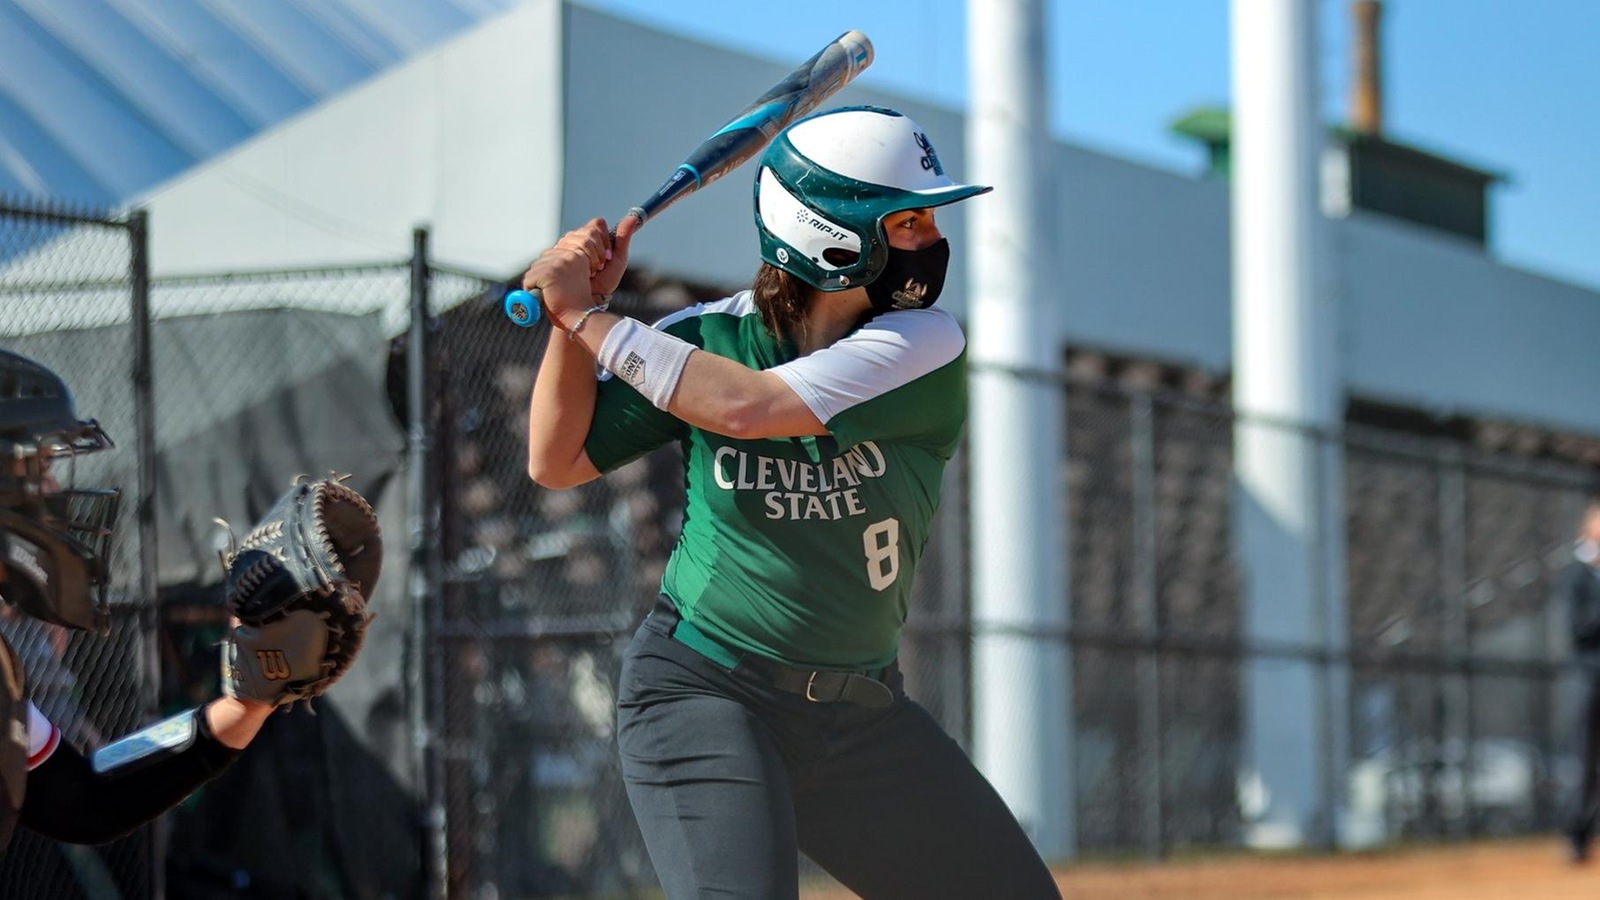 Cleveland State Softball Ends Season with Win Over Robert Morris